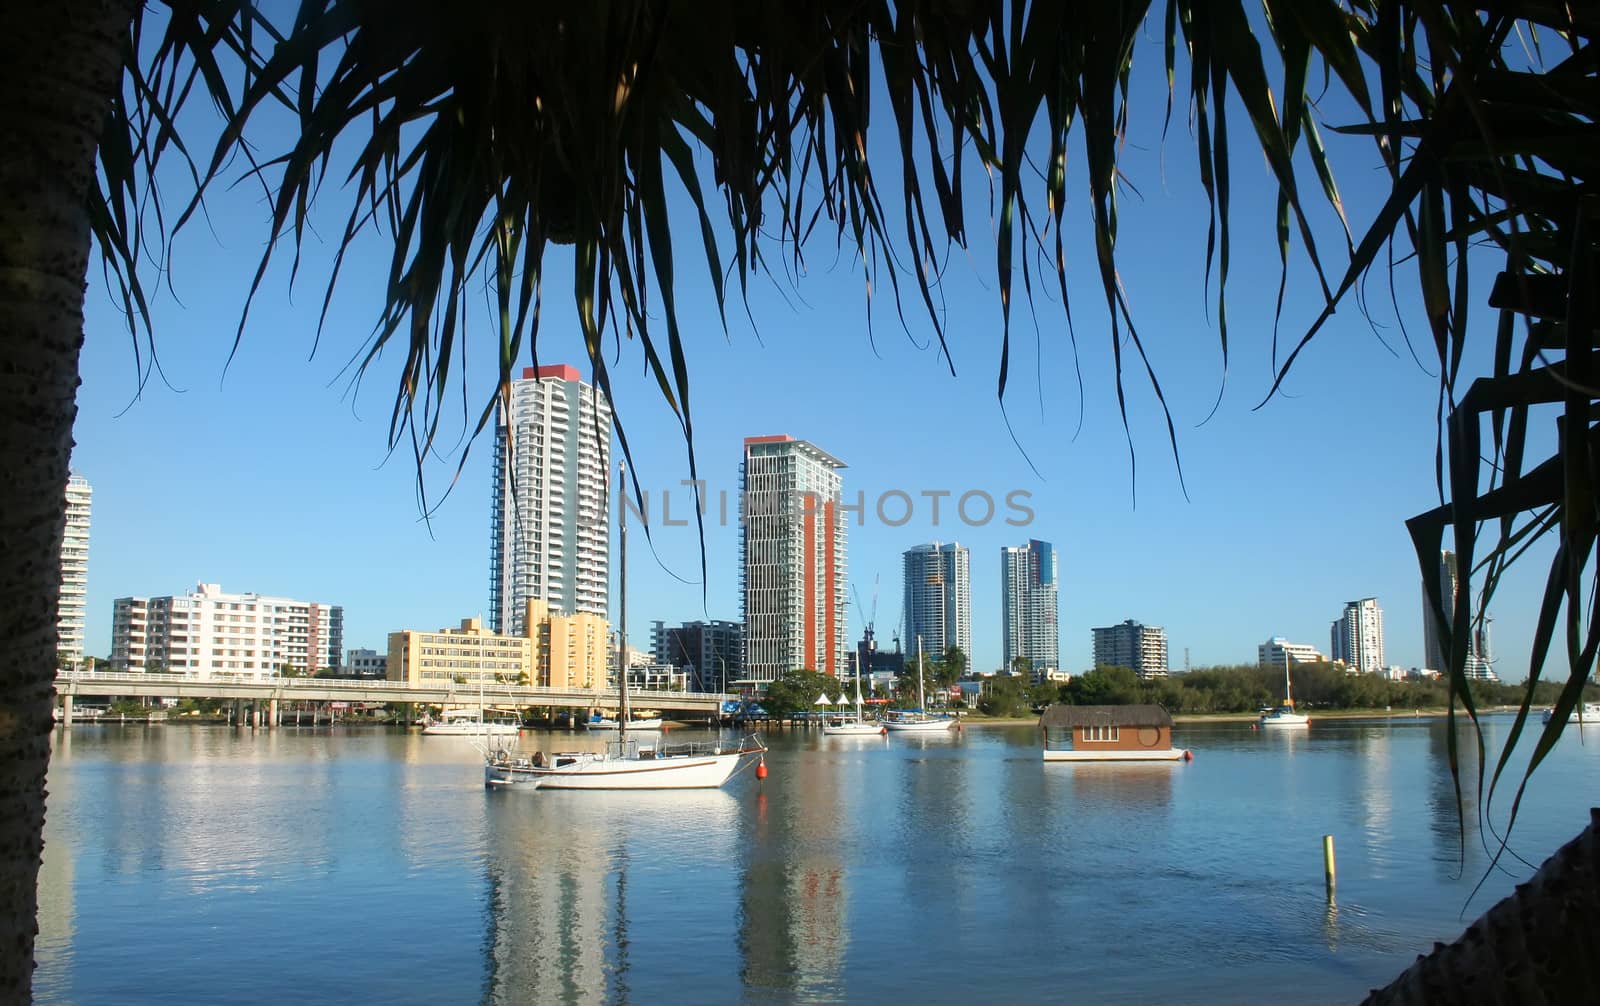 City of Southport on the Gold Coast Australia seen across the Nerang River just after sunrise.